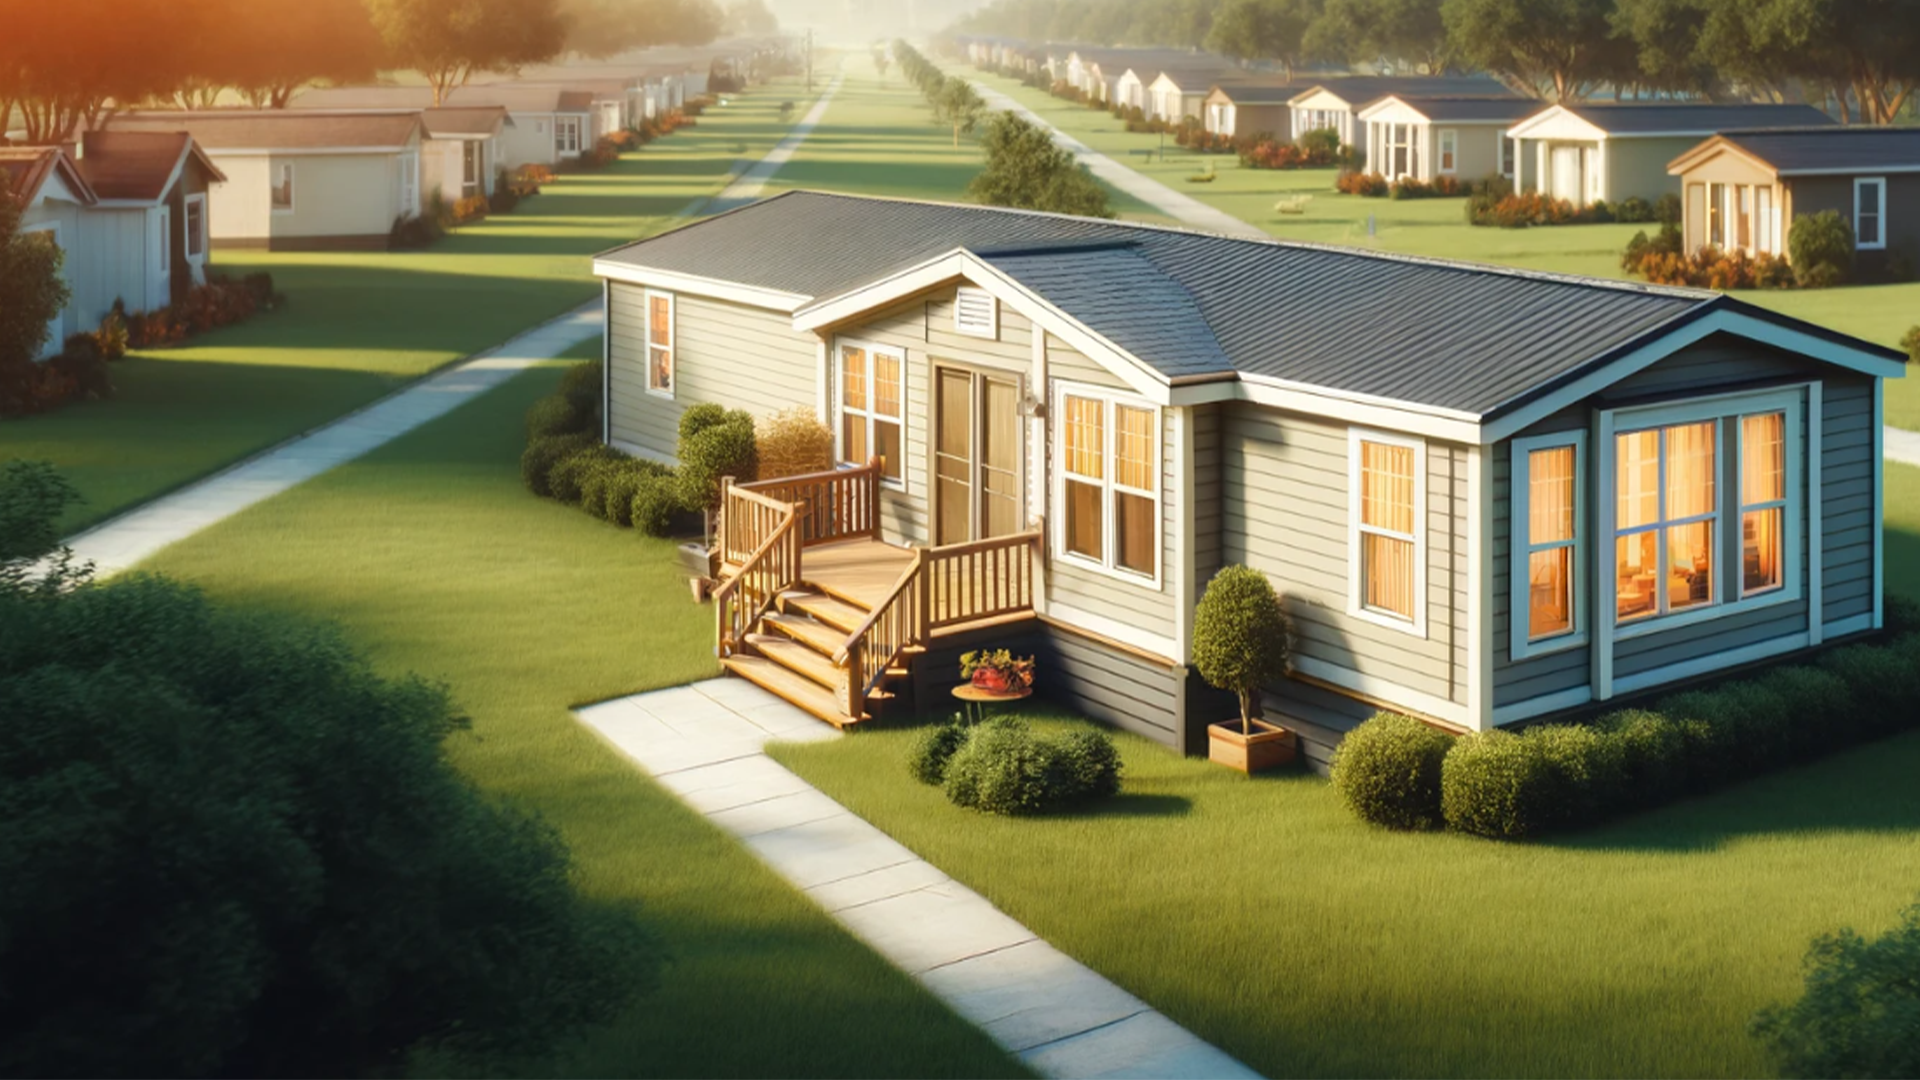 An aerial view of a mobile home in a residential area.